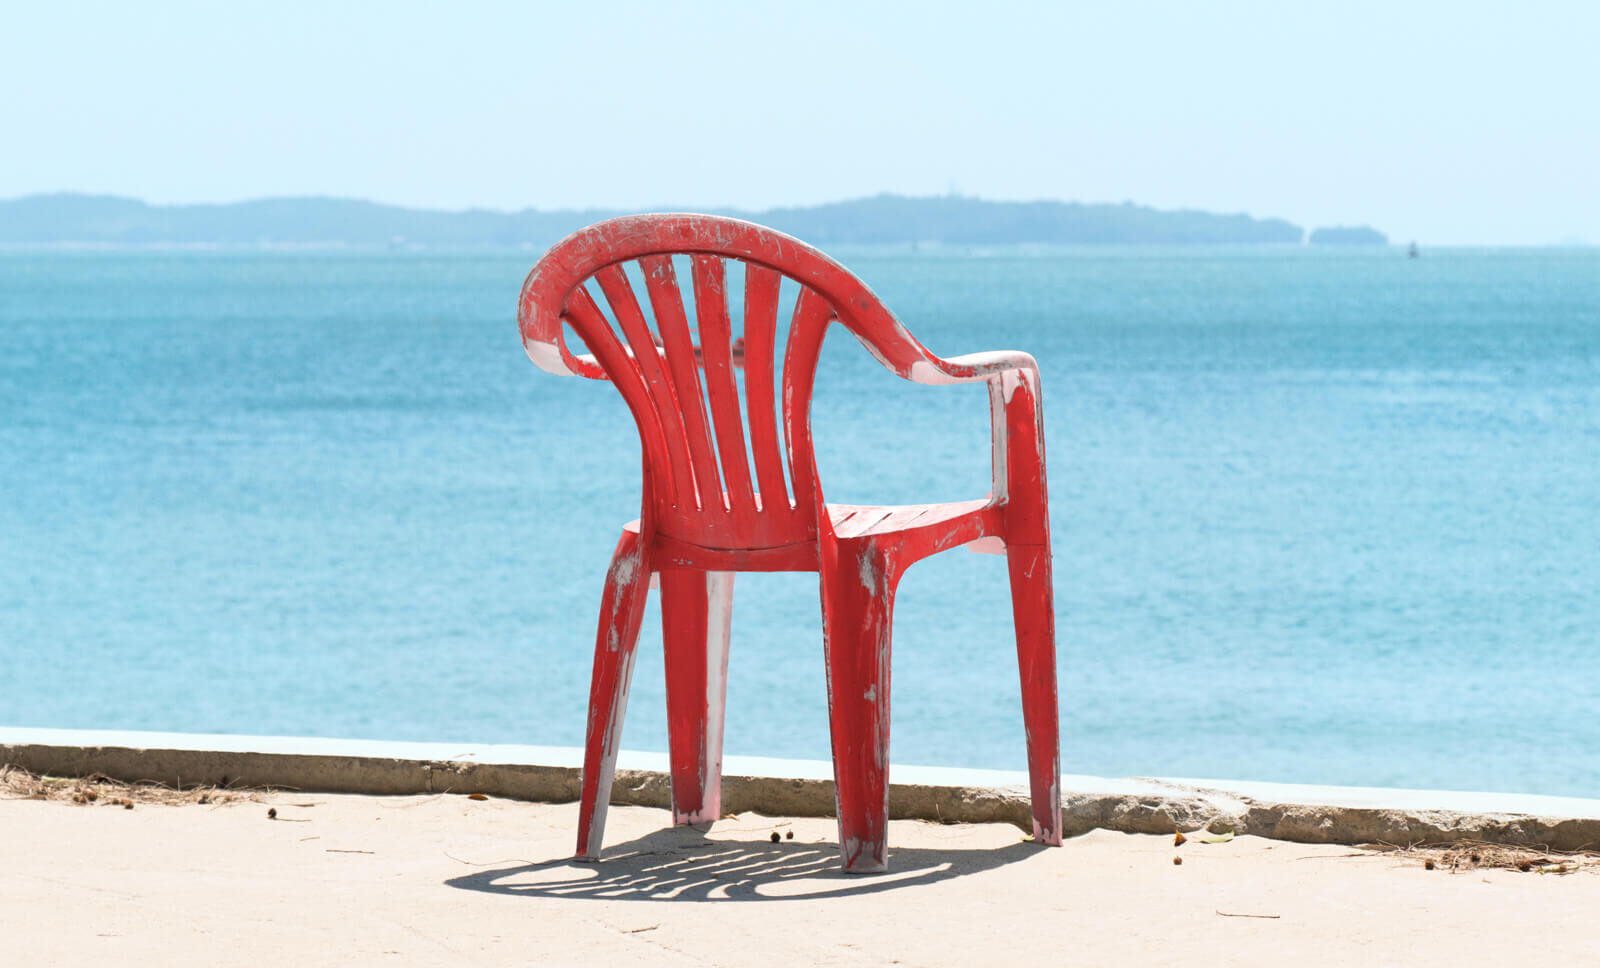 A red plastic chair is overlooking the water